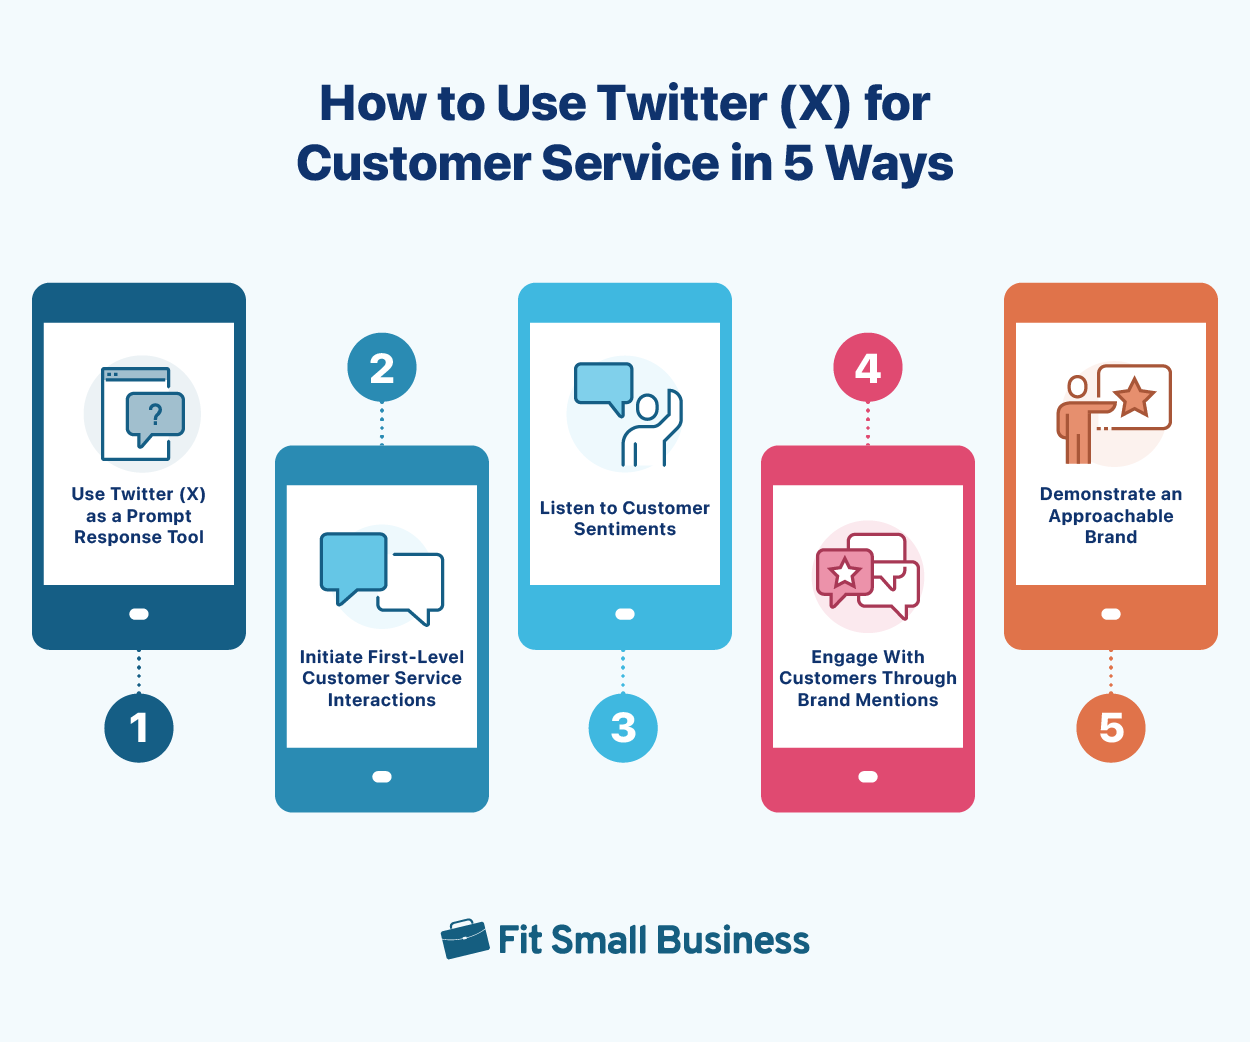 How to Use Twitter (X) for Customer Service in 5 Ways